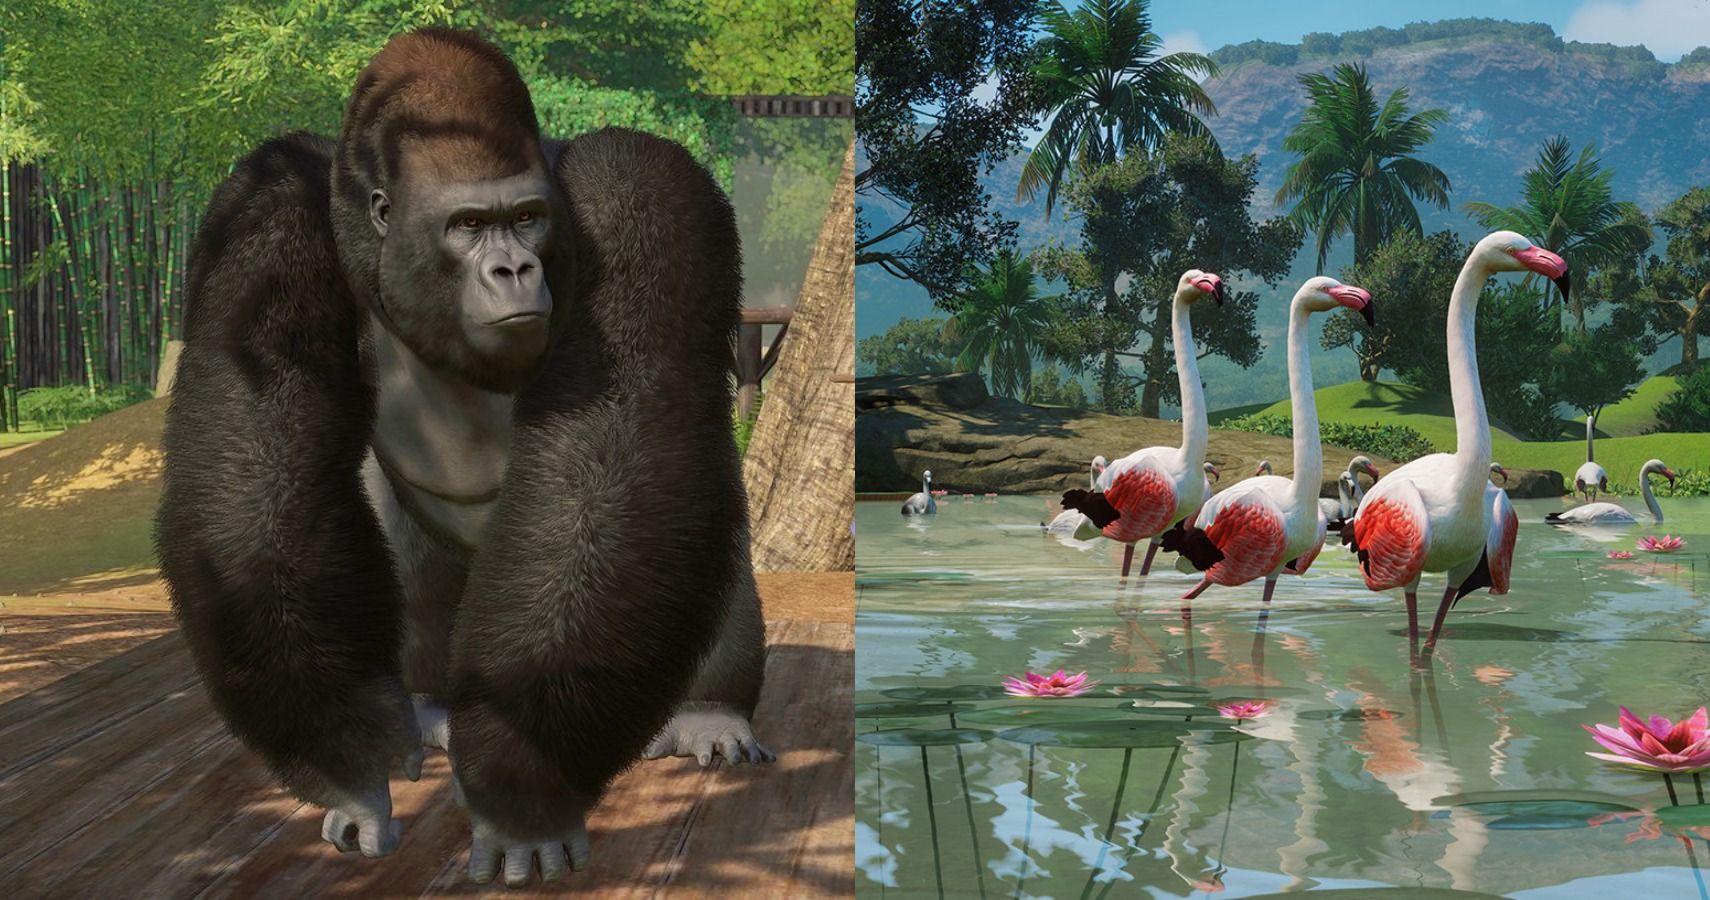 Planet Zoo: 11 Most Popular Animal Attractions And 4 Least Popular